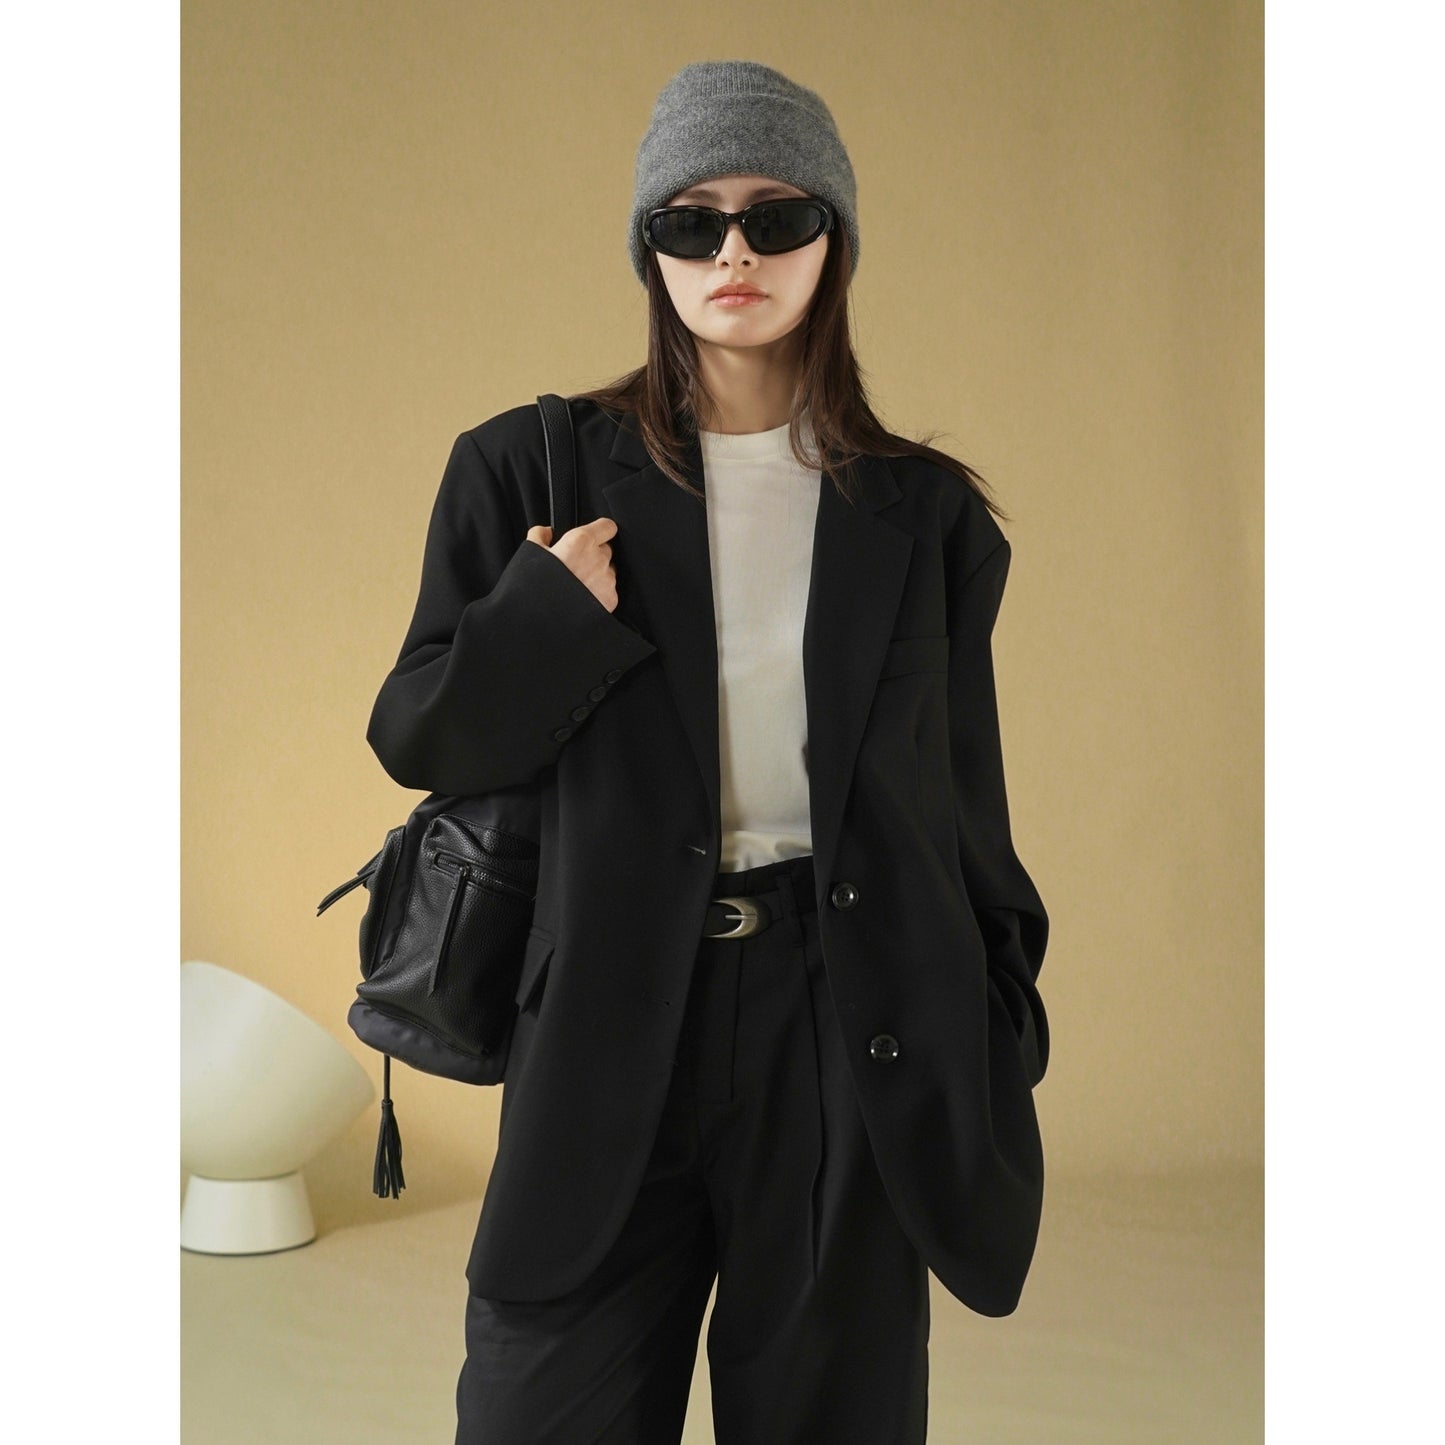 Wide shoulder suit, loose fitting, slim and wide casual coat for women